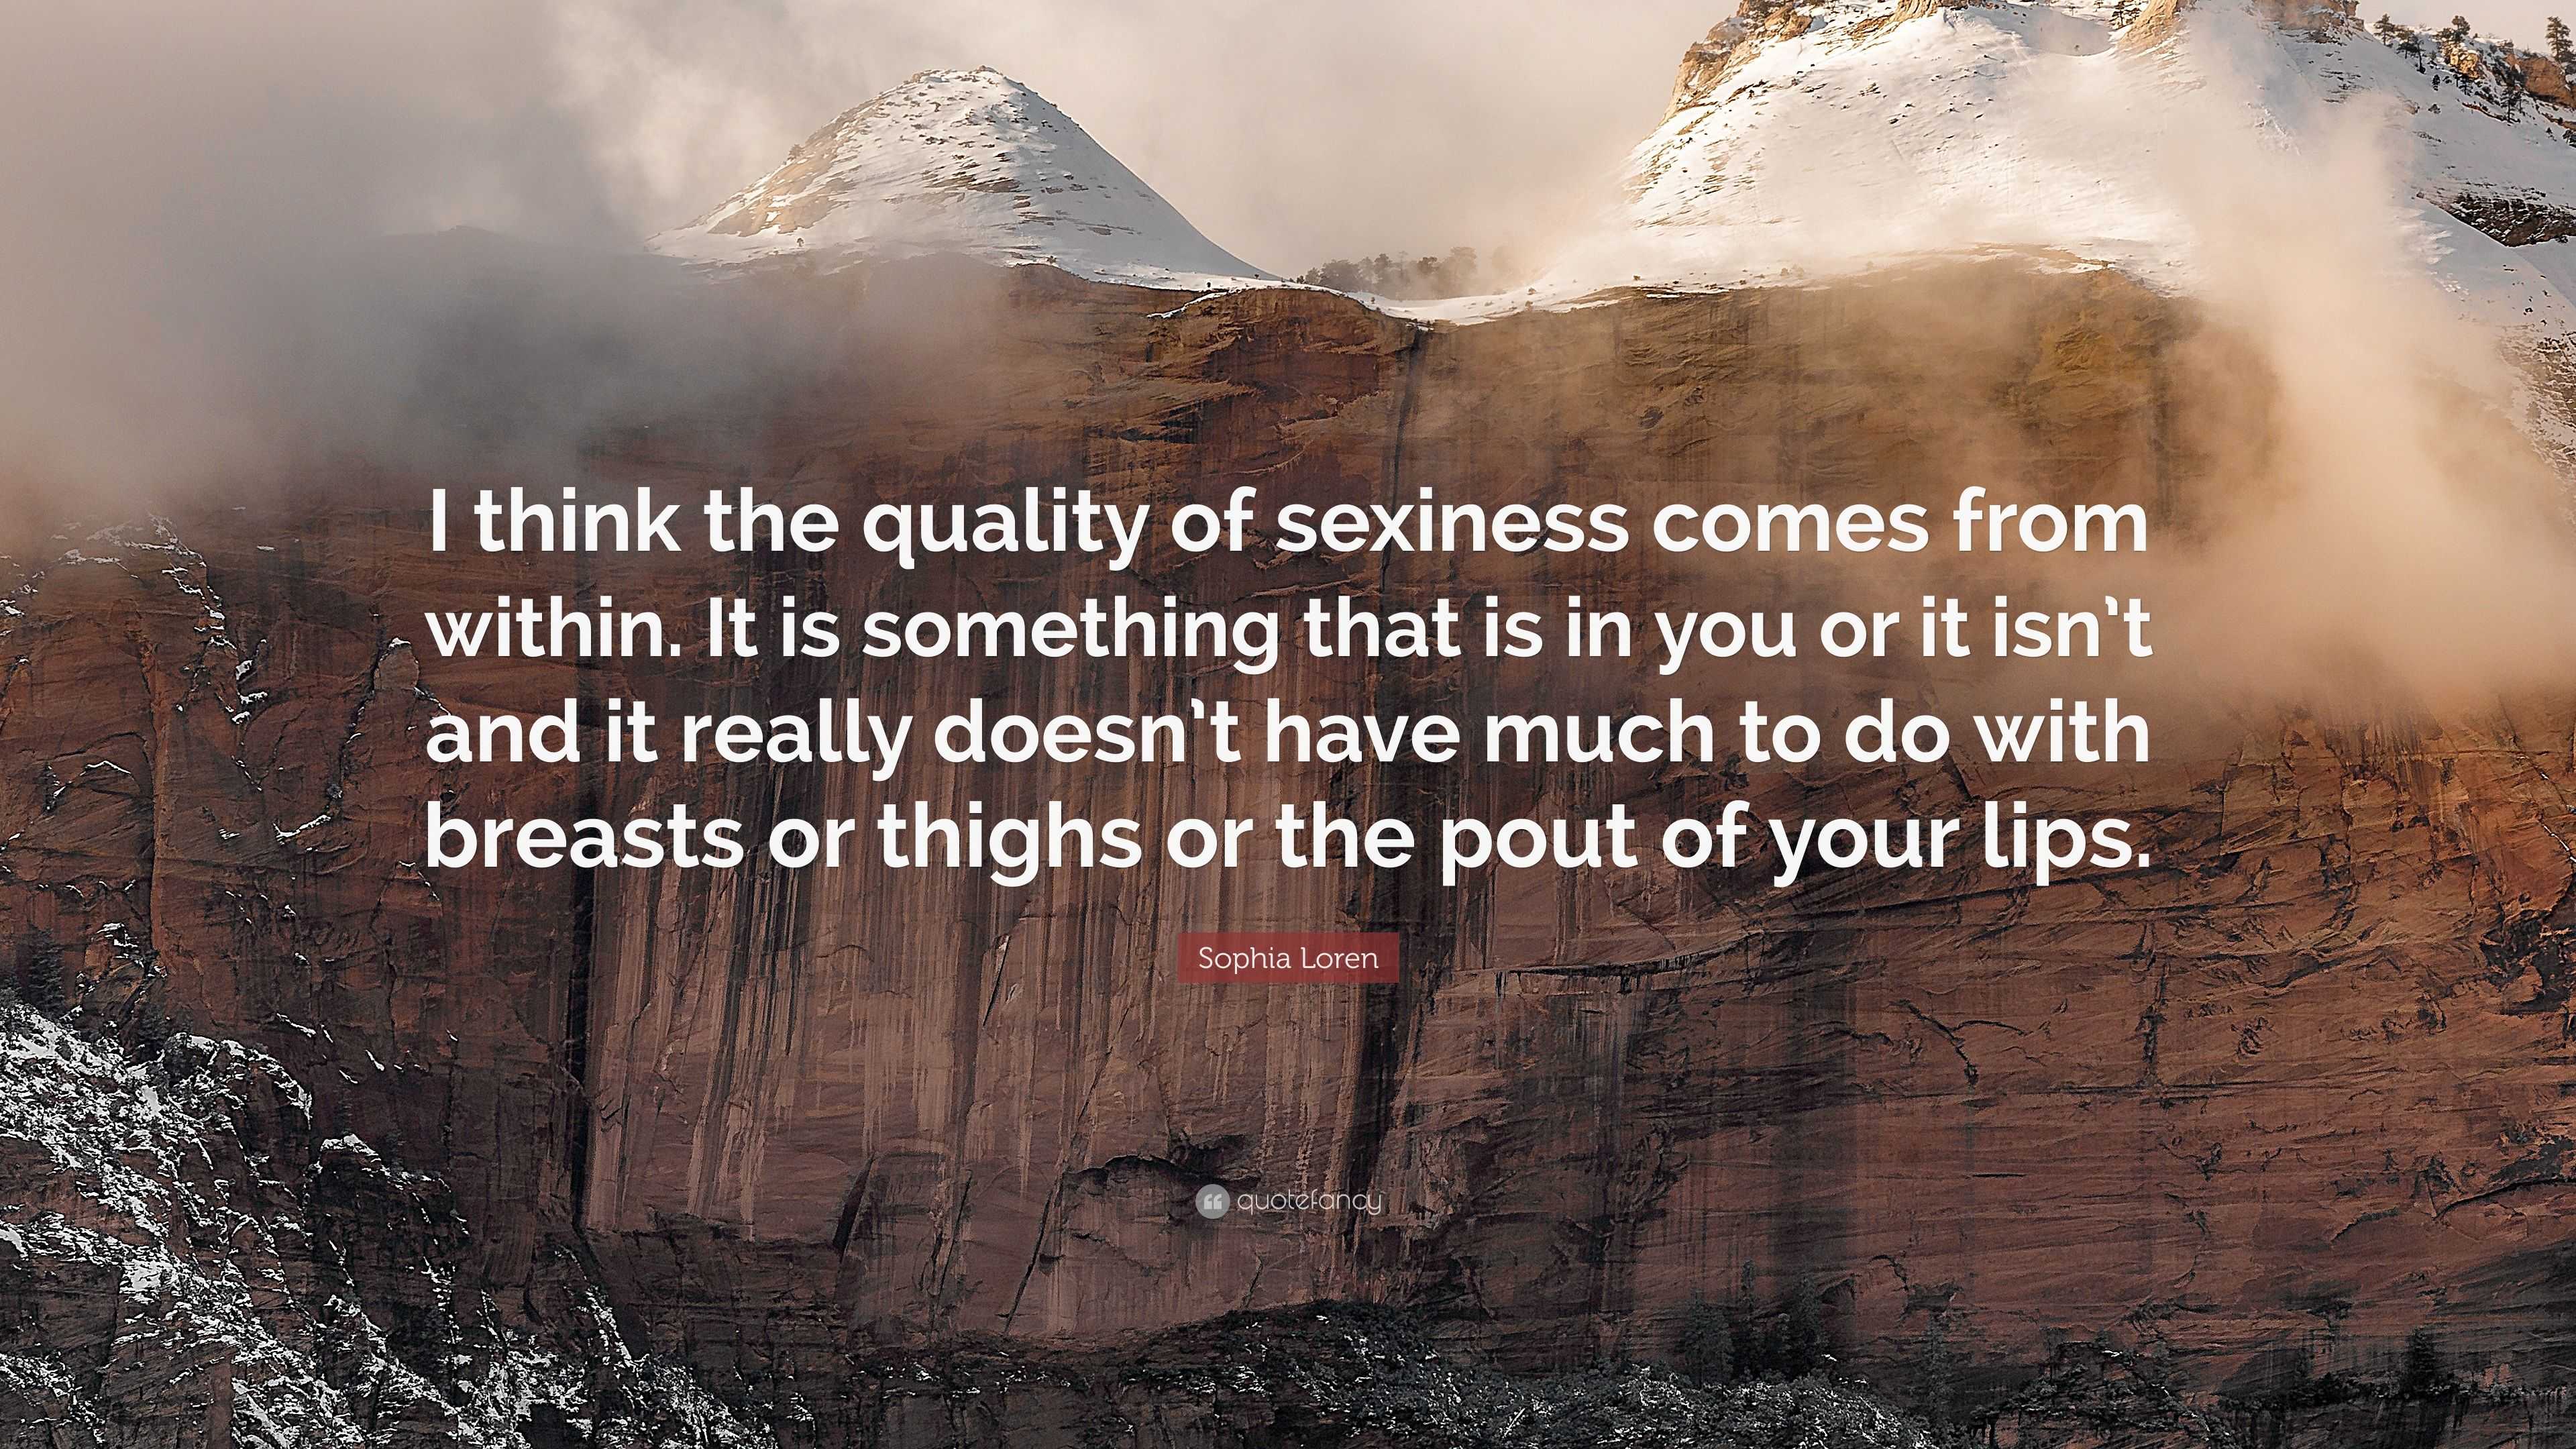 Sophia Loren Quote: “I think the quality of sexiness comes from